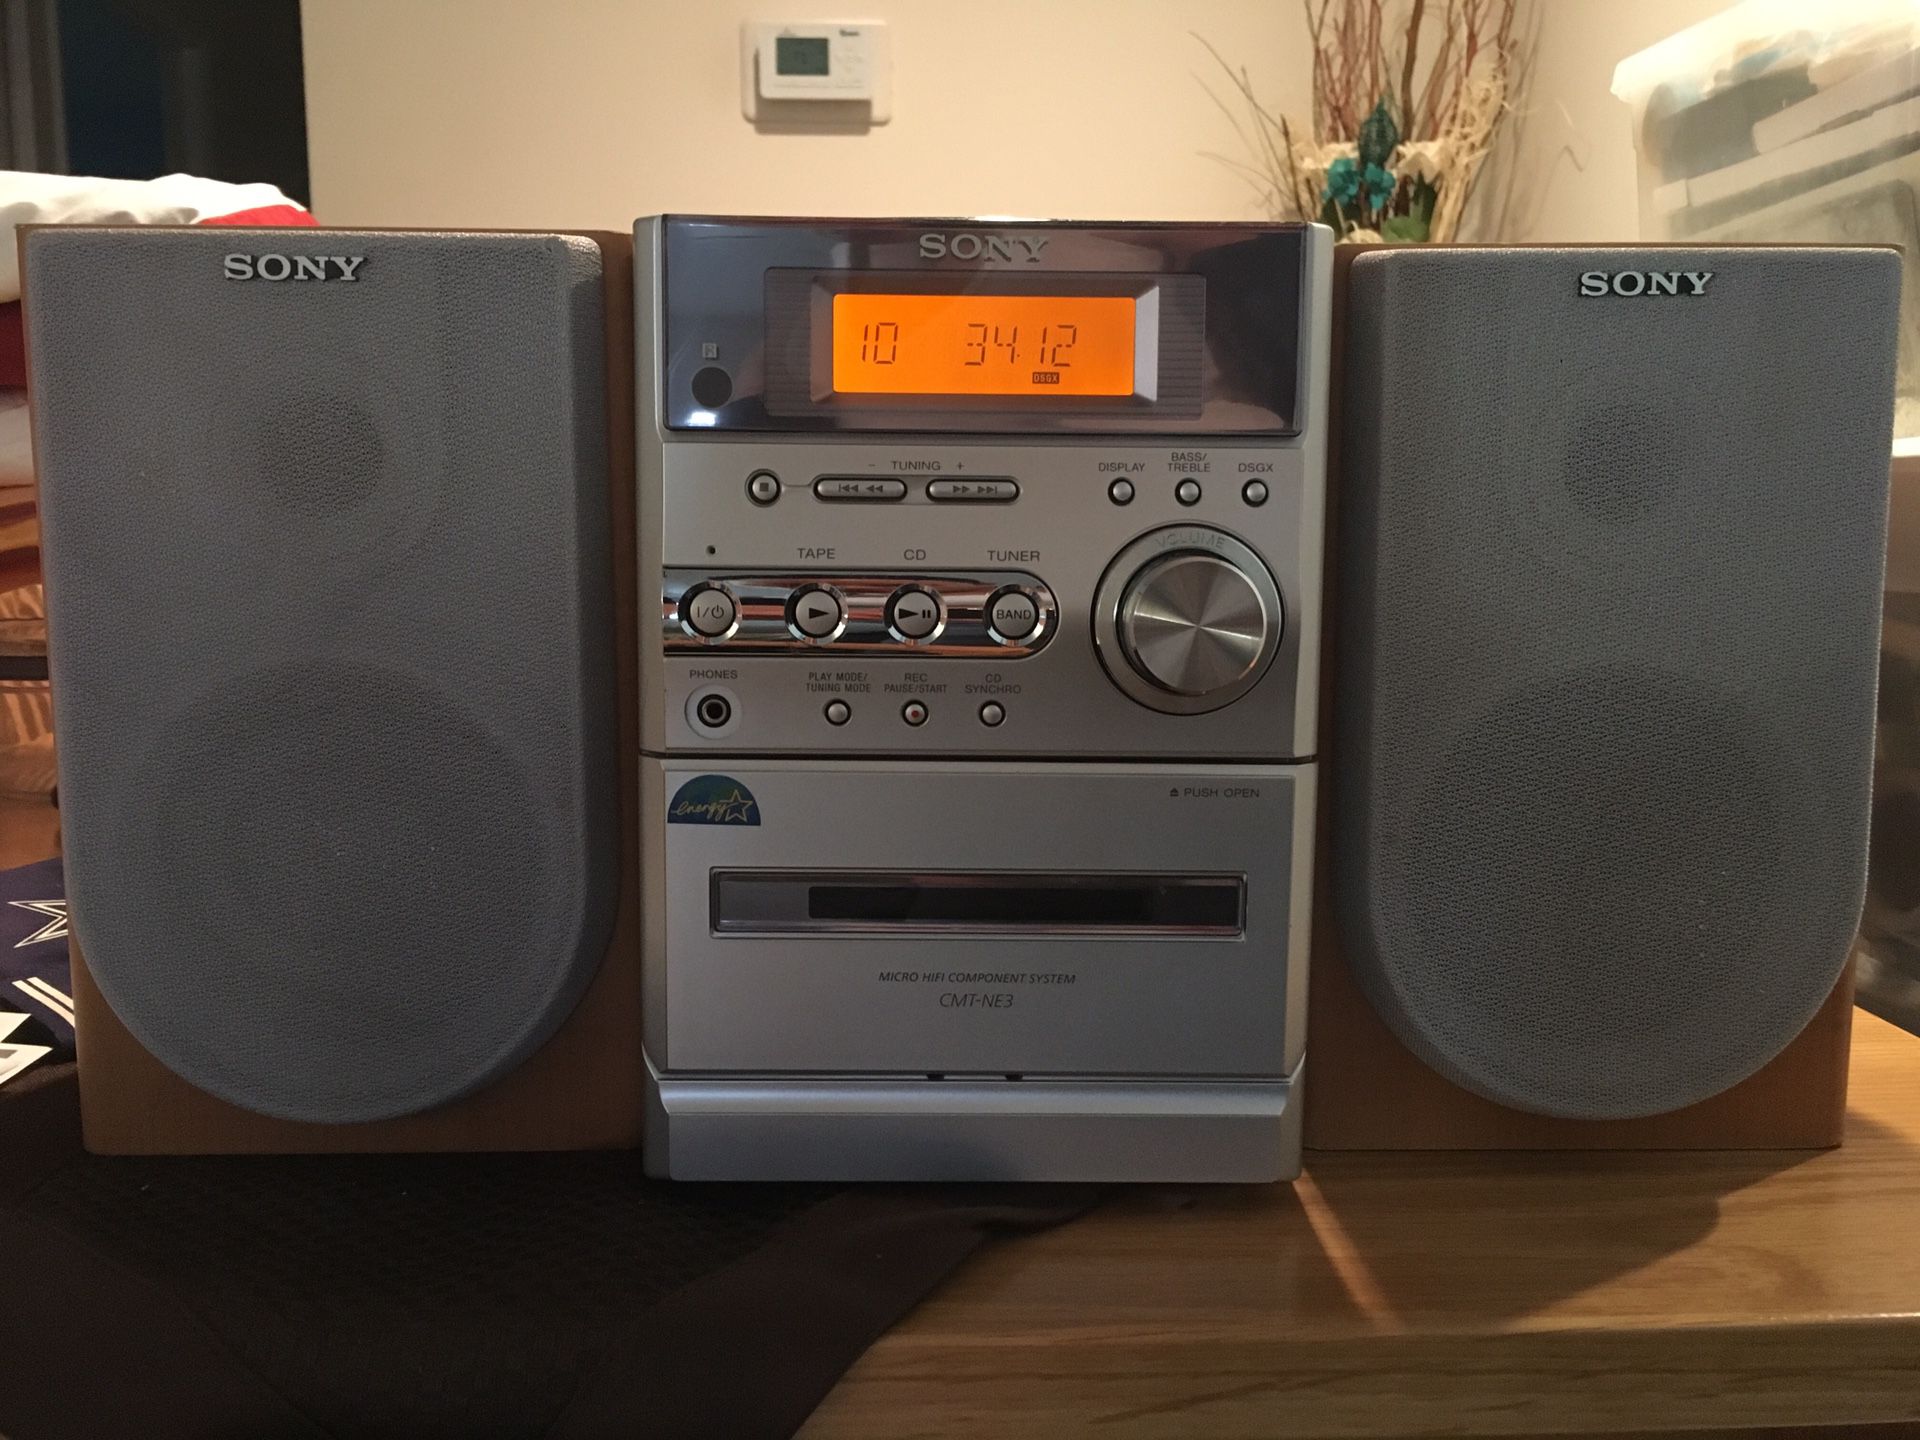 Sony compact stereo